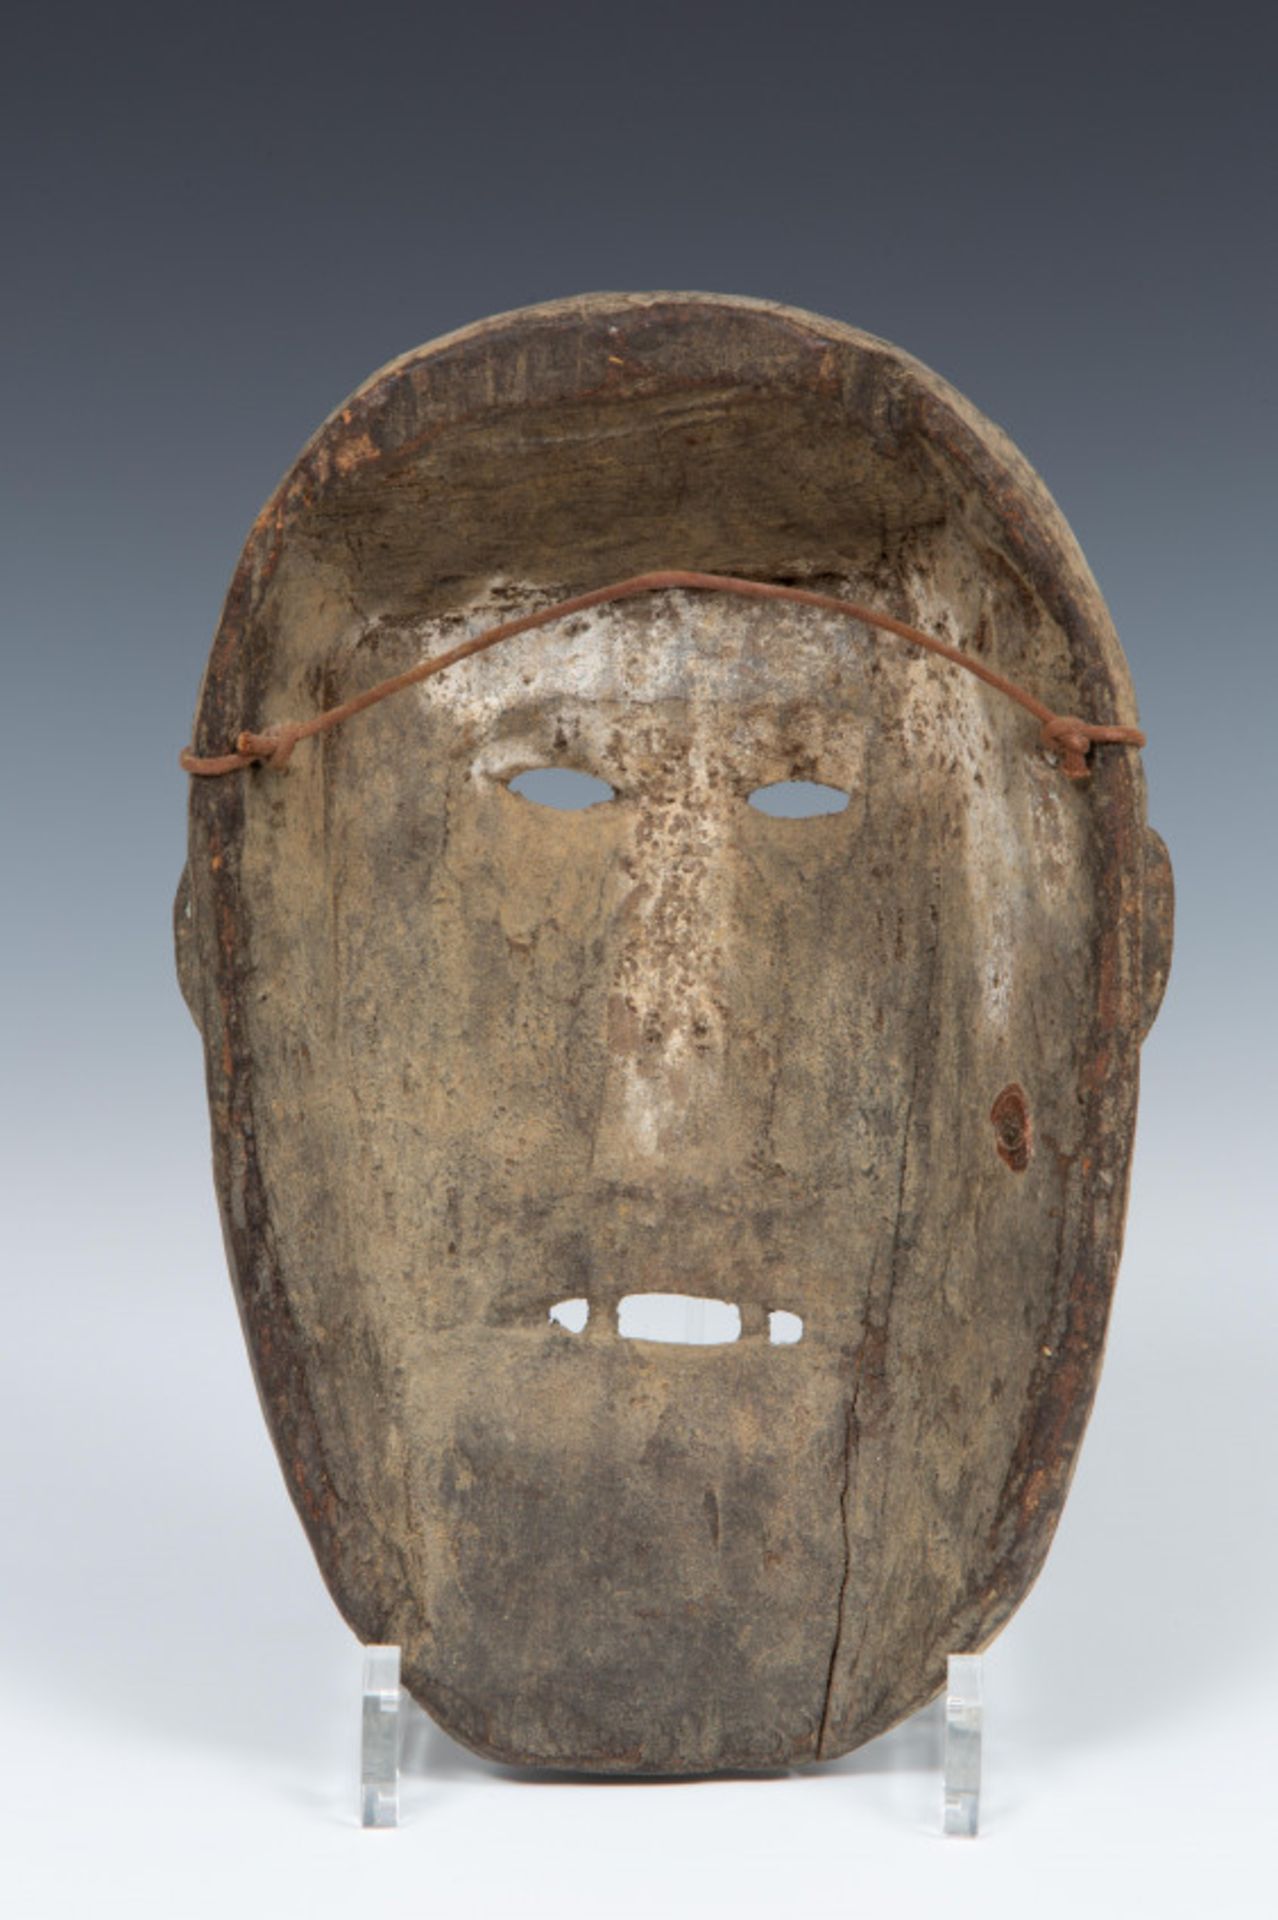 Nepal, demonic shaman mask with lacquer seal, fang teeth and remains of offering pigments, - Image 2 of 3